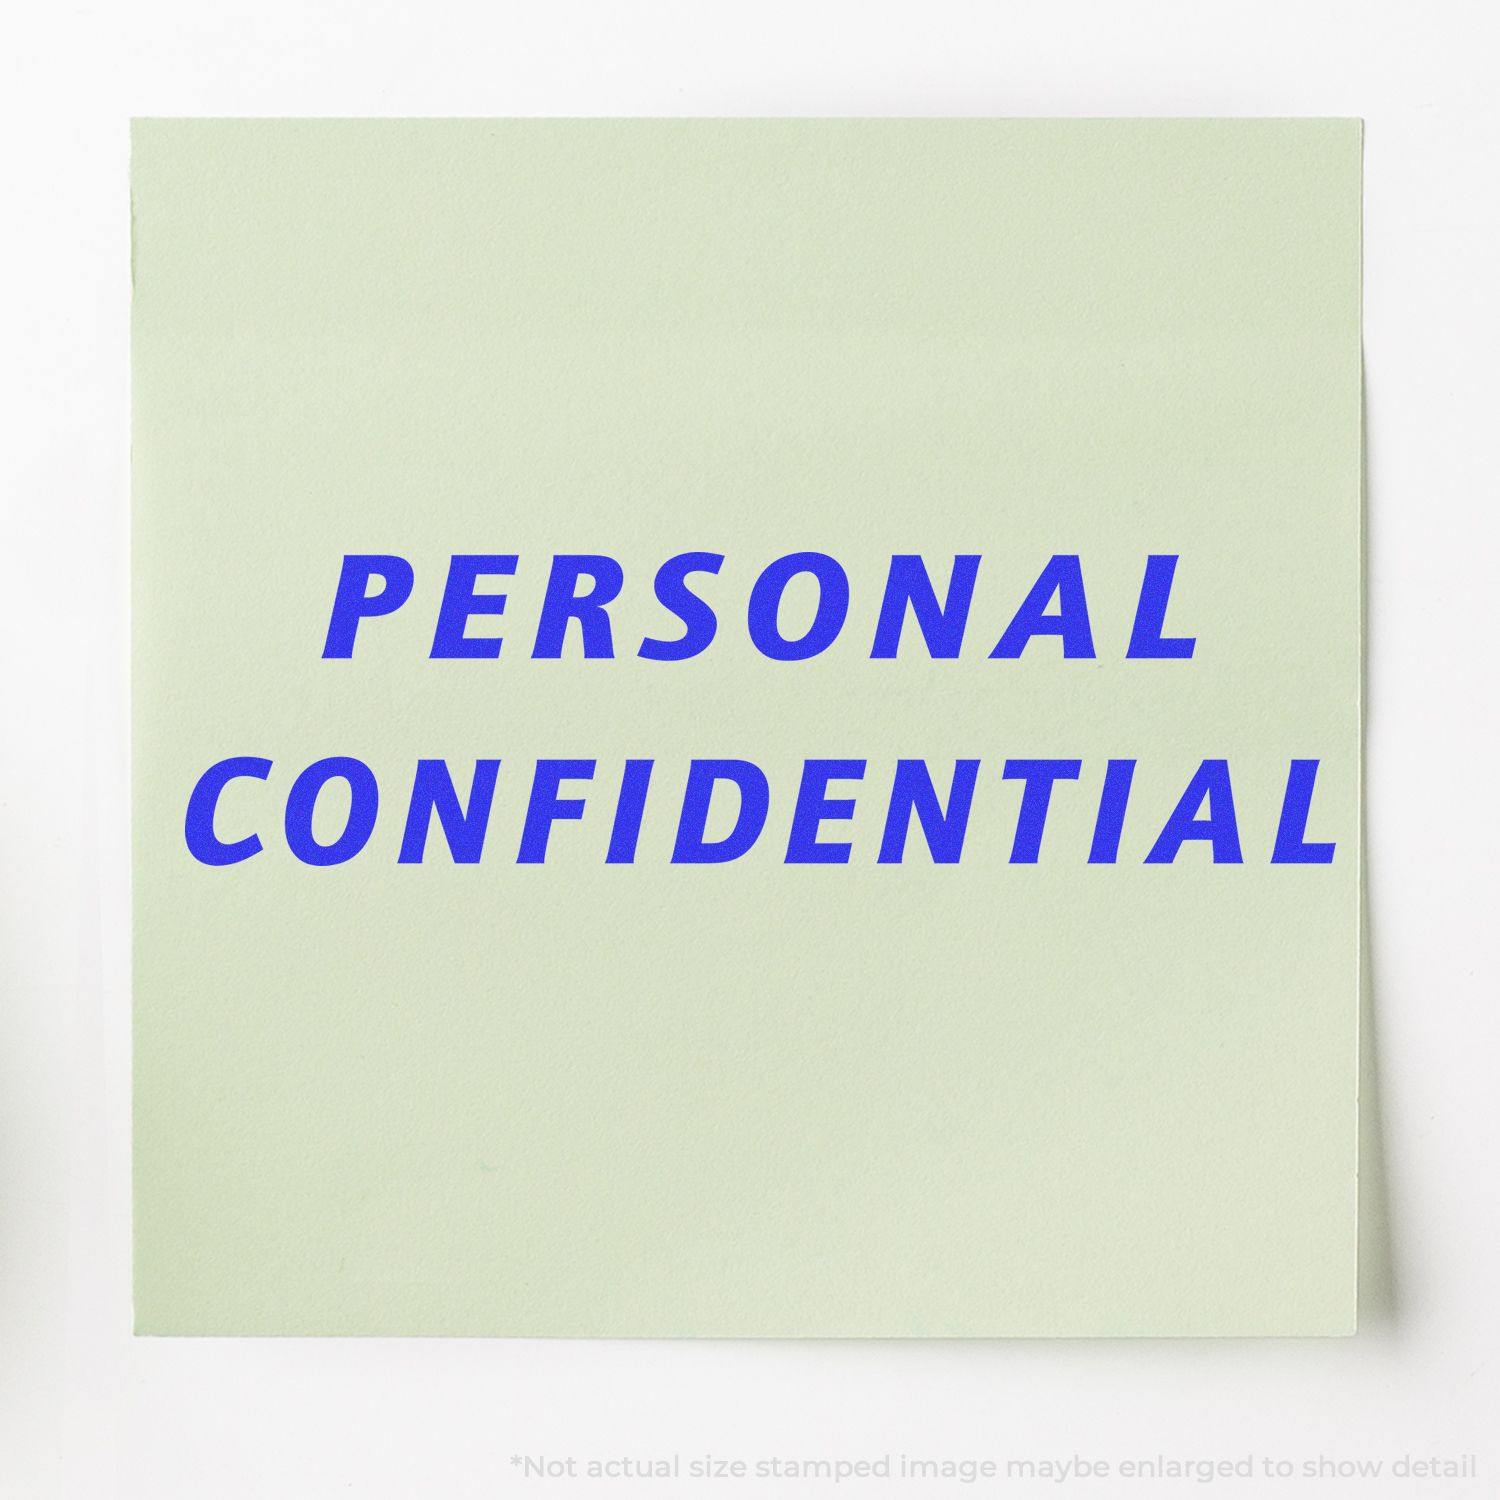 A stock office pre-inked stamp with a stamped image showing how the text "PERSONAL CONFIDENTIAL" in italic font is displayed after stamping.